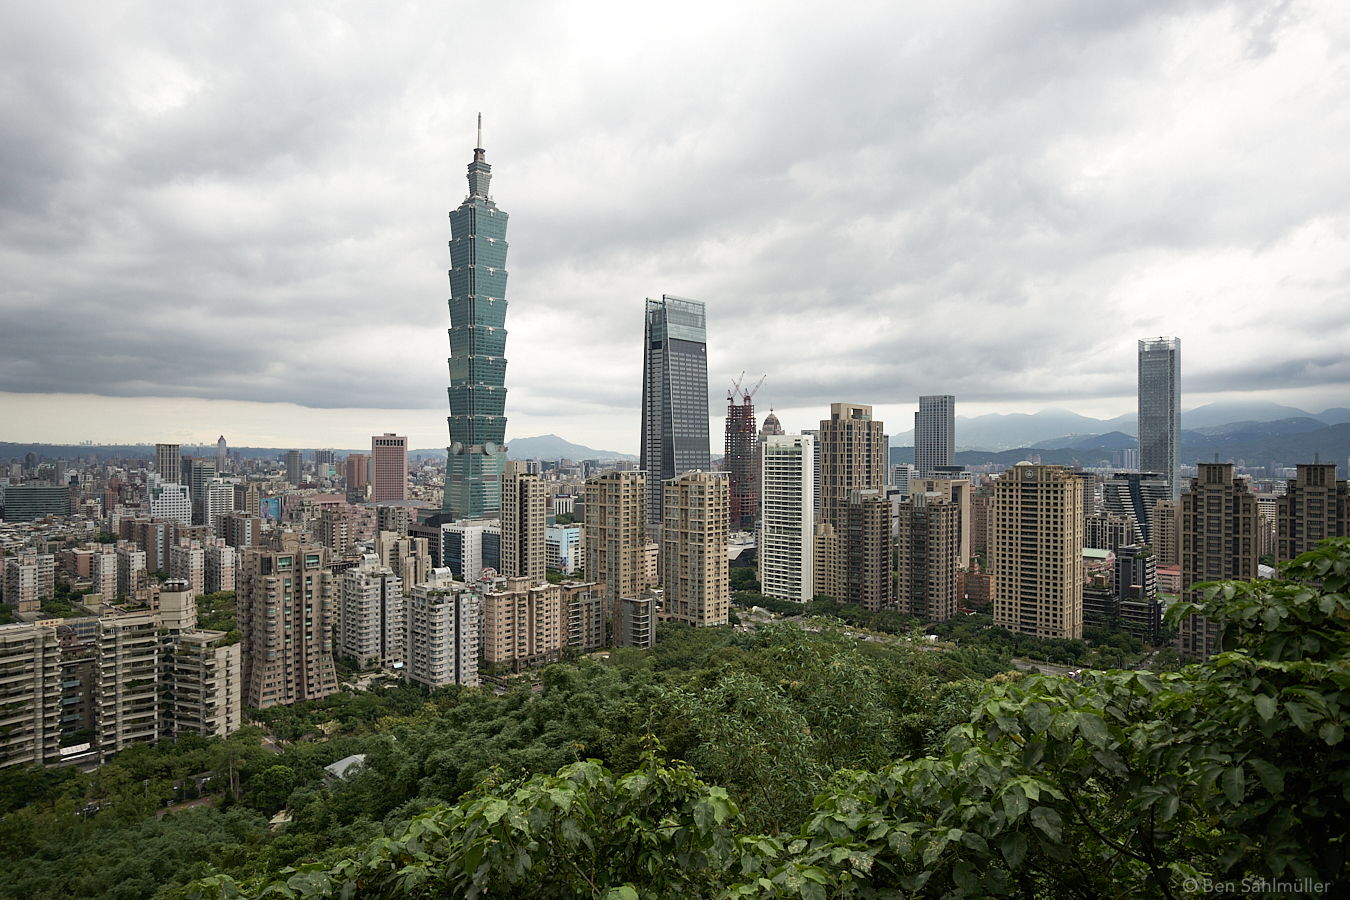 Taipei 101 and the Xinyi commercial area around it